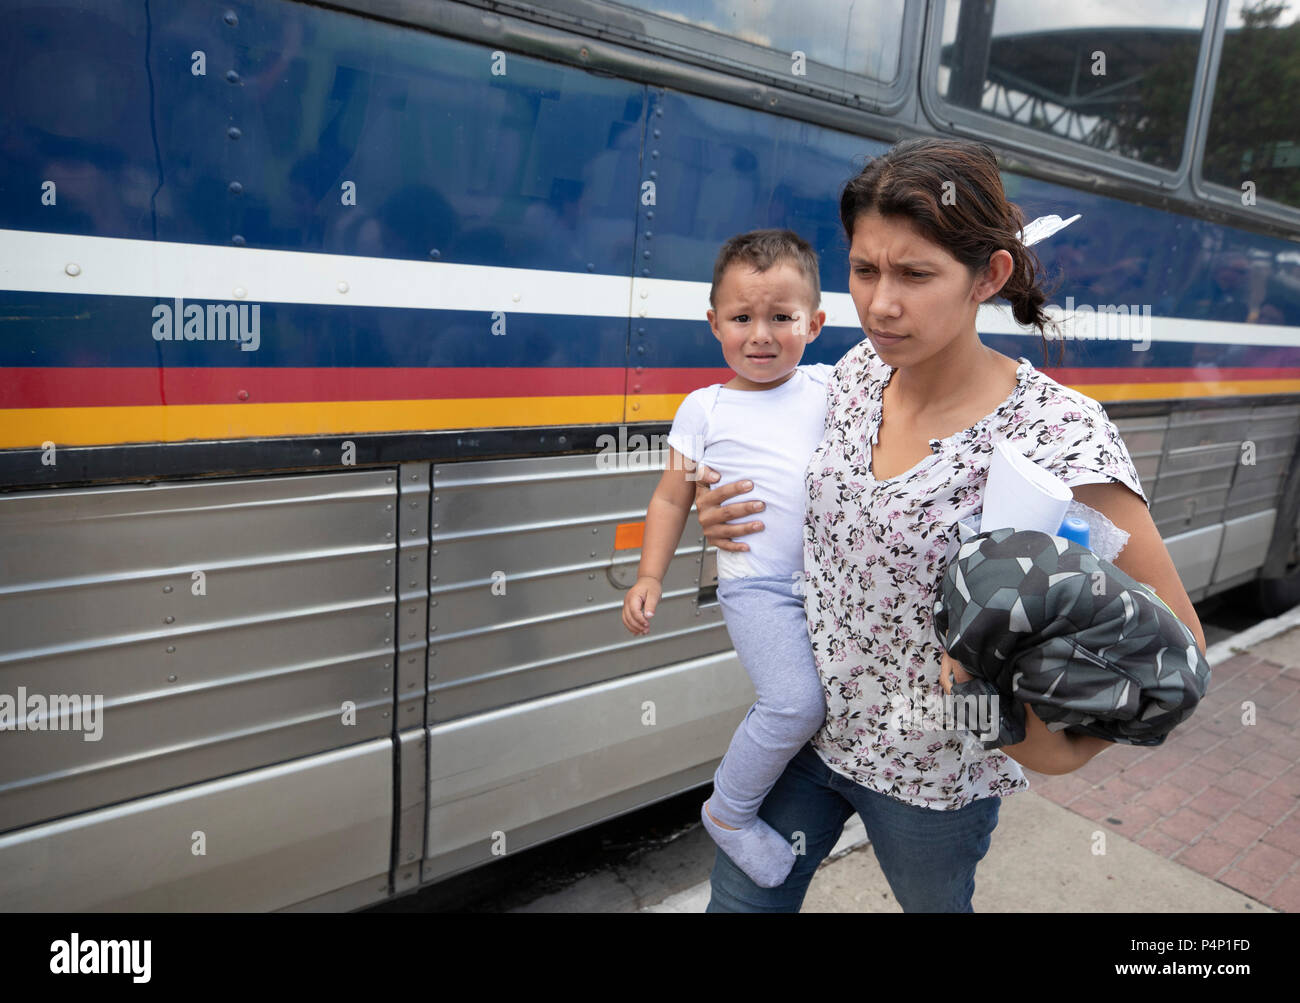 An immigrant mother, wearing an electronic monitoring device, and her young child captured coming across the United States-Mexico border in Texas are released at a bus station in McAllen. The family will travel to stay with family members in the U.S. while awaiting a  deportation or asylum hearing. Stock Photo